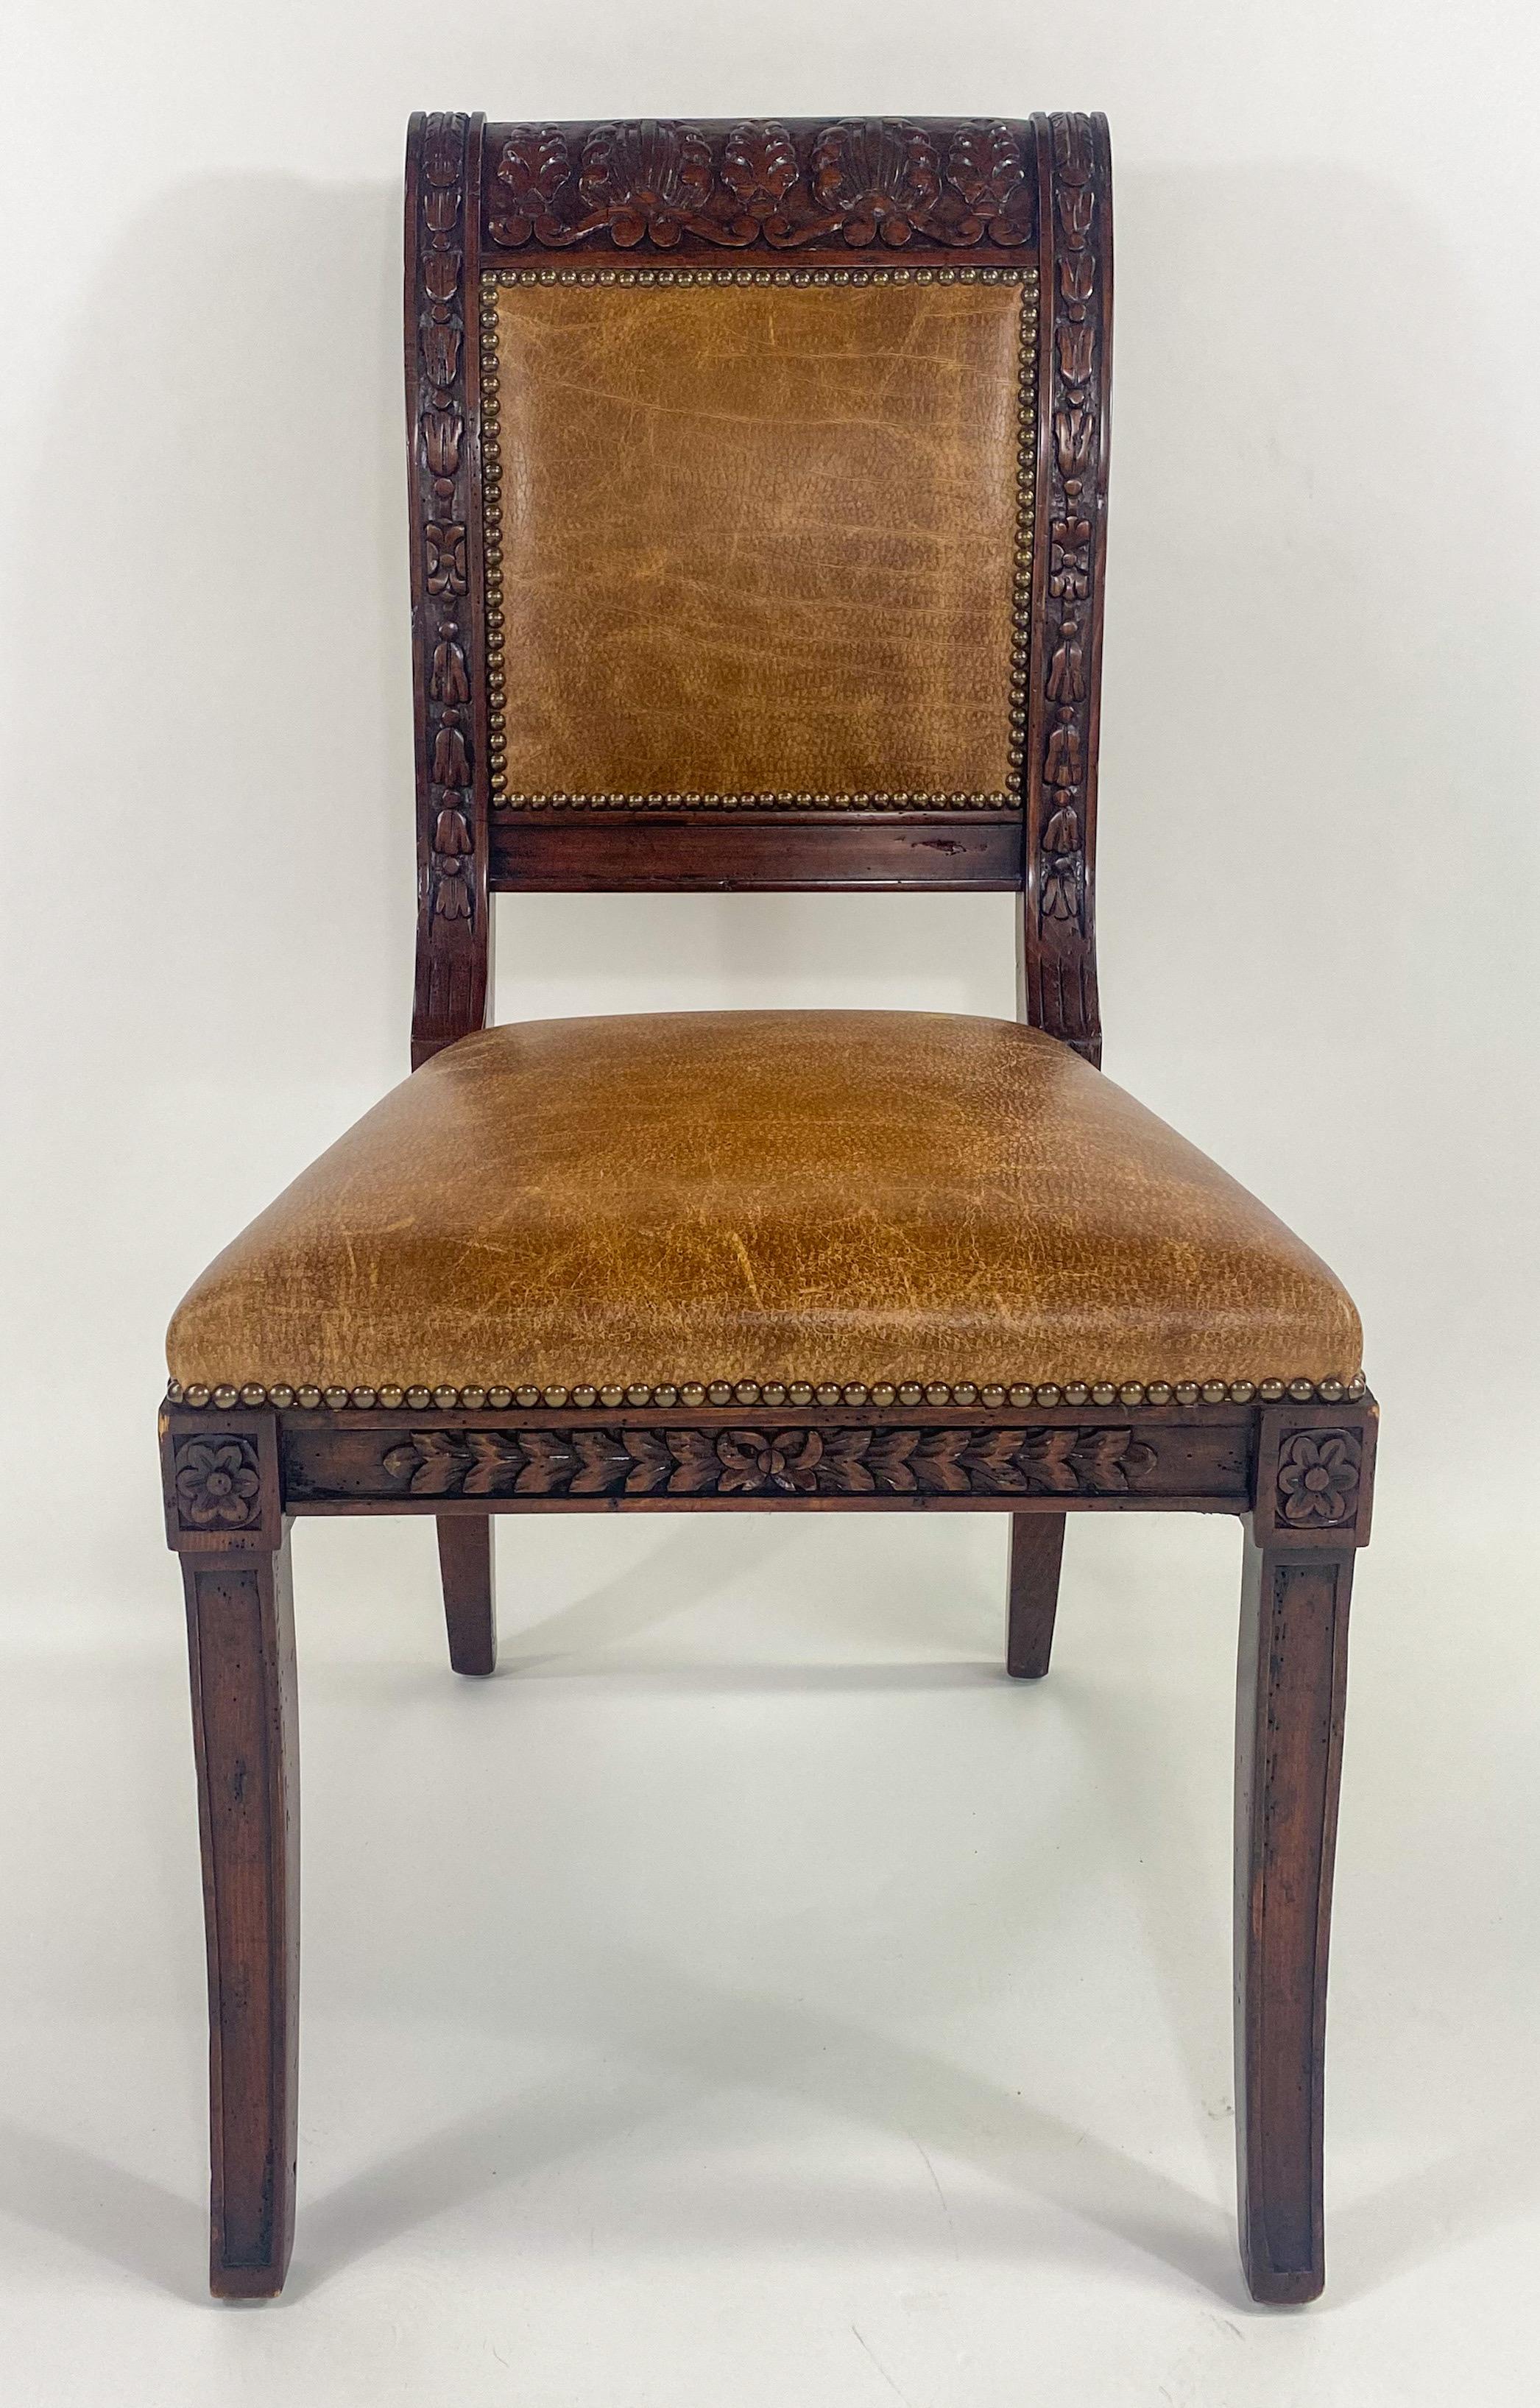 French Empire Style Mahogany & Leather Saber Legs Dining Chair, A Set of 8 In Good Condition For Sale In Plainview, NY